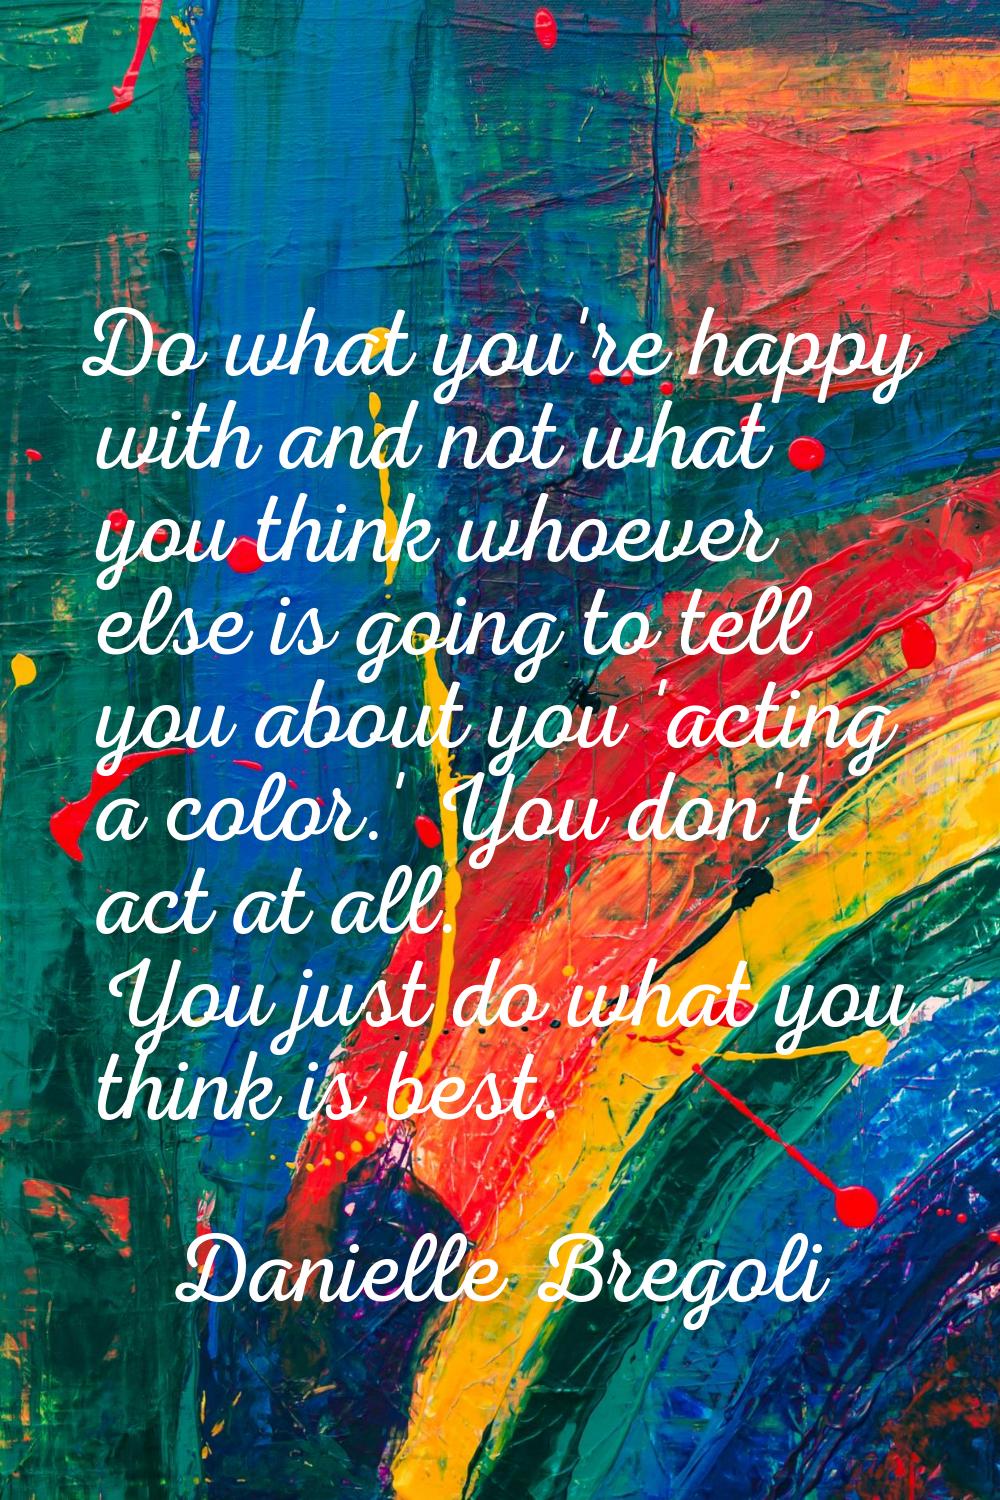 Do what you're happy with and not what you think whoever else is going to tell you about you 'actin